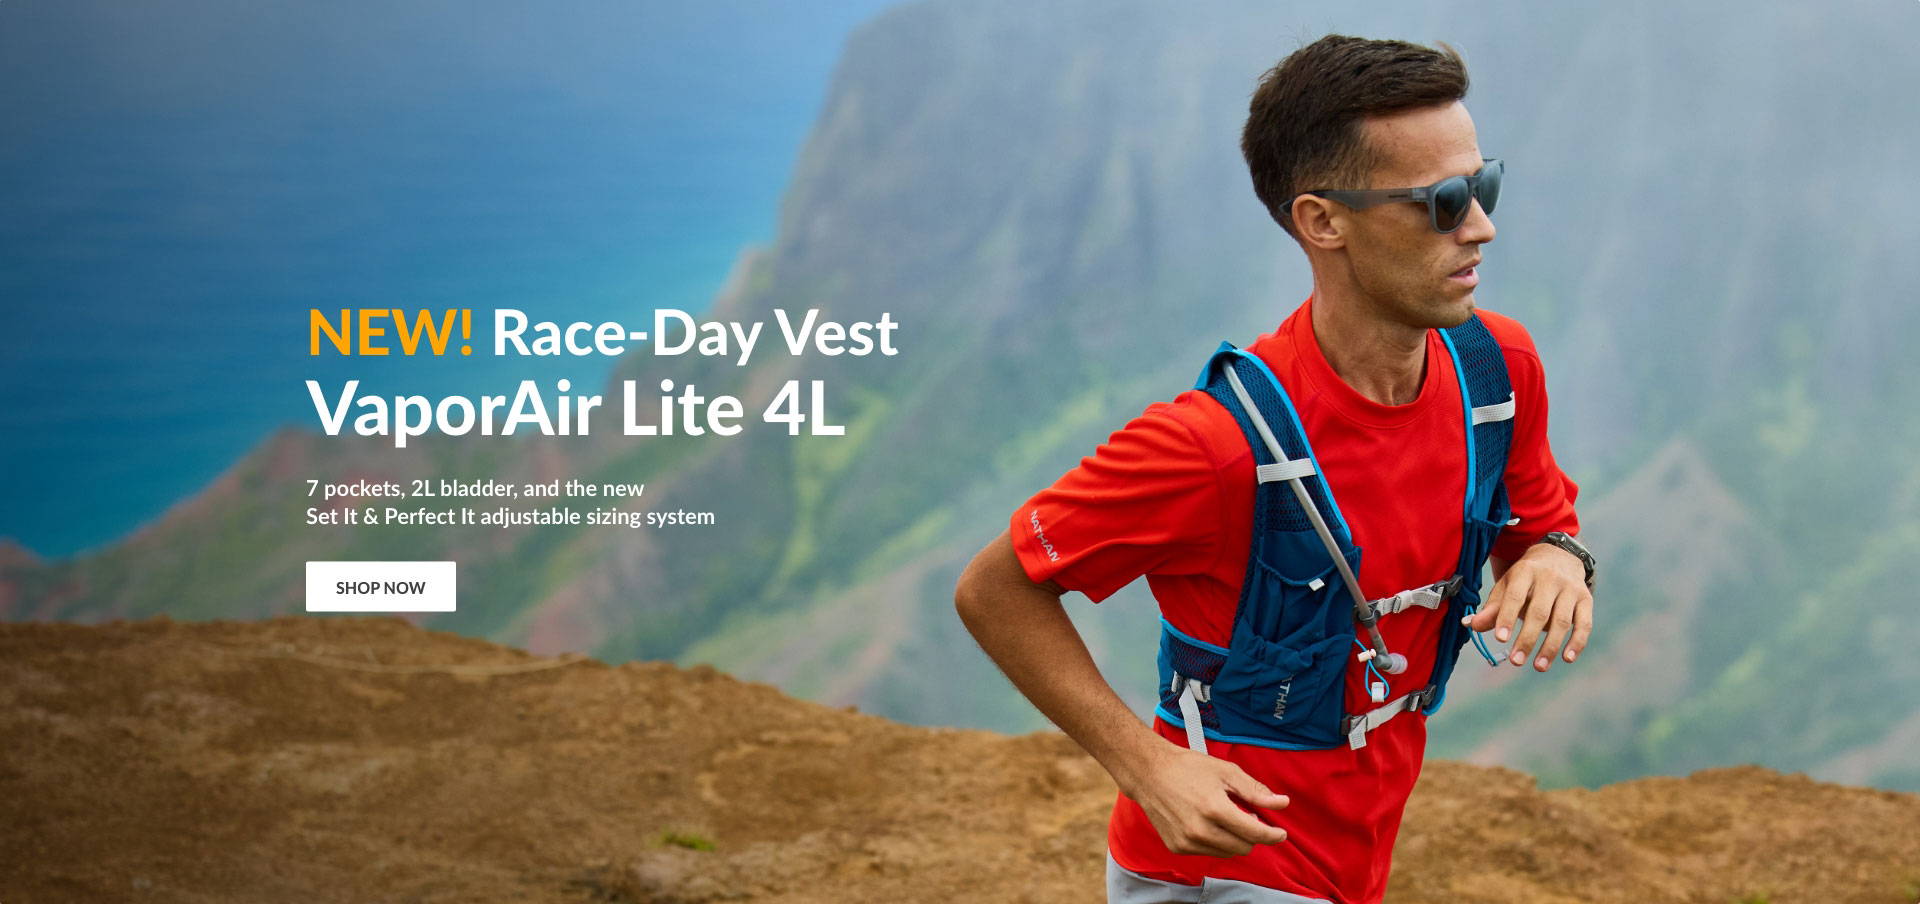 NEW! Race-Day Vest VaporAir Lite 4L - 7 pockets, 2L bladder, and new Set It & Perfect It adjustable sizing system - Shop Now